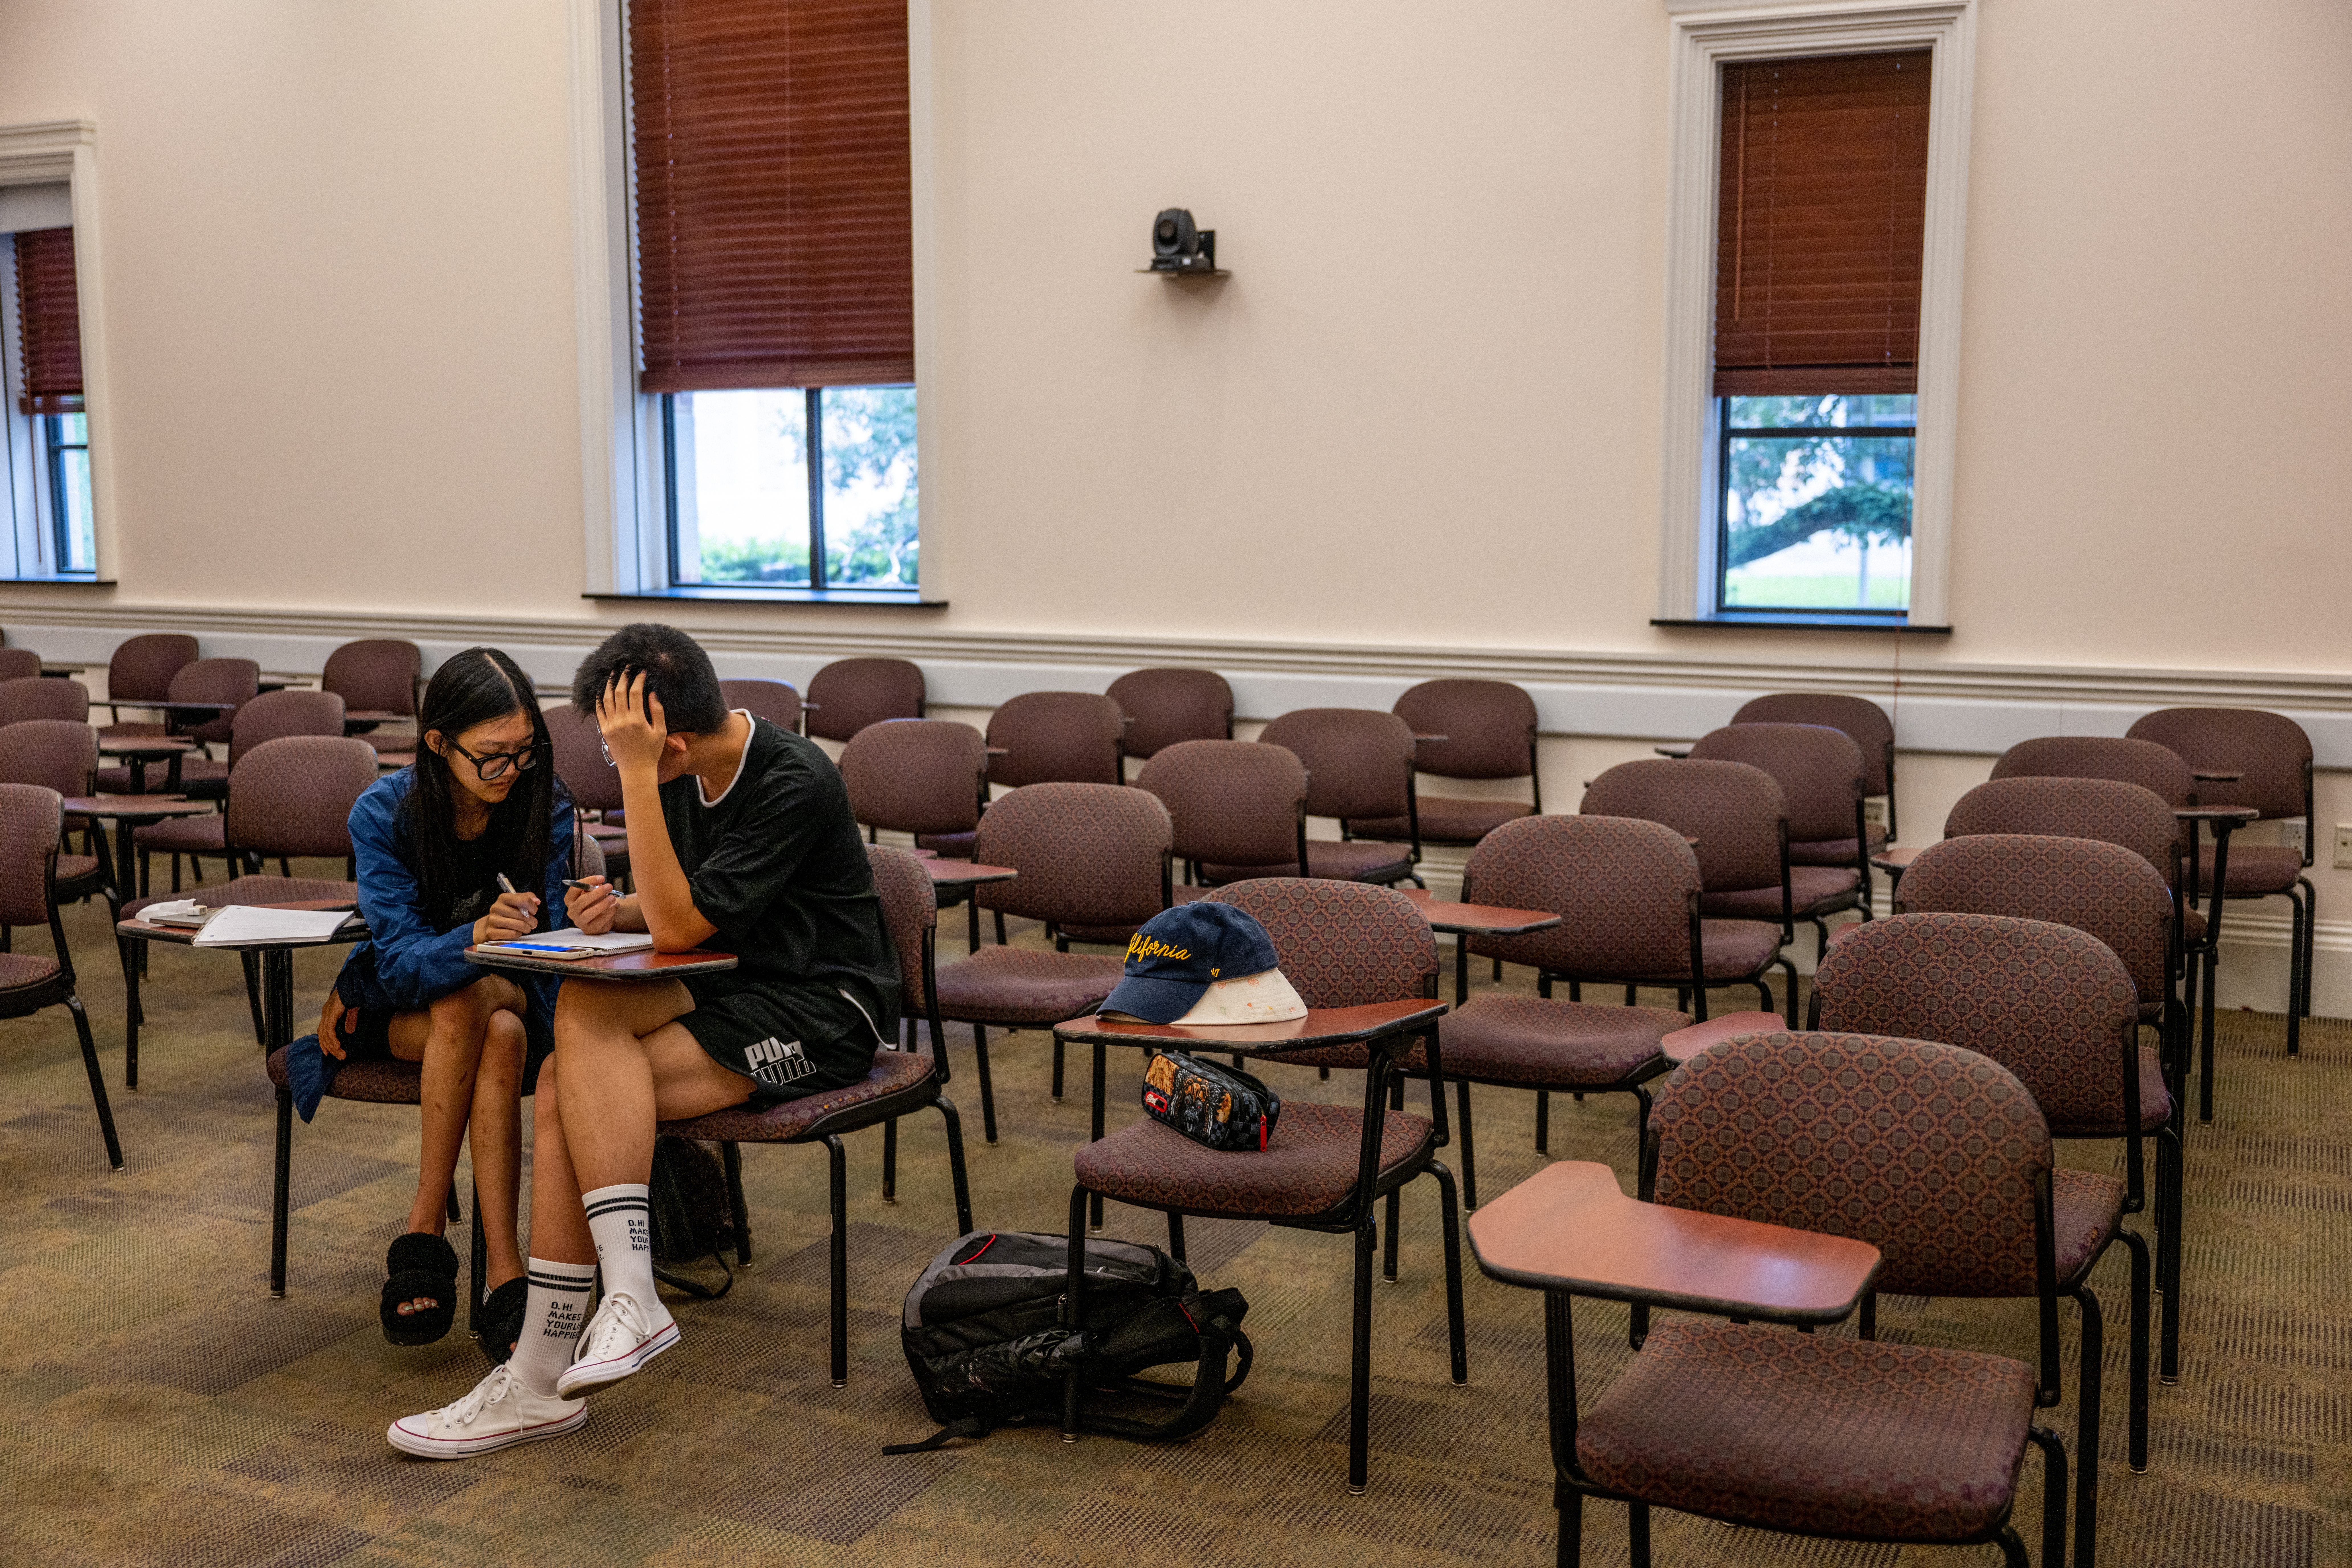 Two students study in a classroom at Rice University on August 29, 2022 in Houston, Texas. U.S. President Joe Biden has announced a three-part plan that will forgive hundreds of billions of dollars in federal student loan debt. Since announced, the plan has sparked controversy as critics have begun questioning its fairness, and addressing concerns over its impact on inflation. (Photo by Brandon Bell/Getty Images)